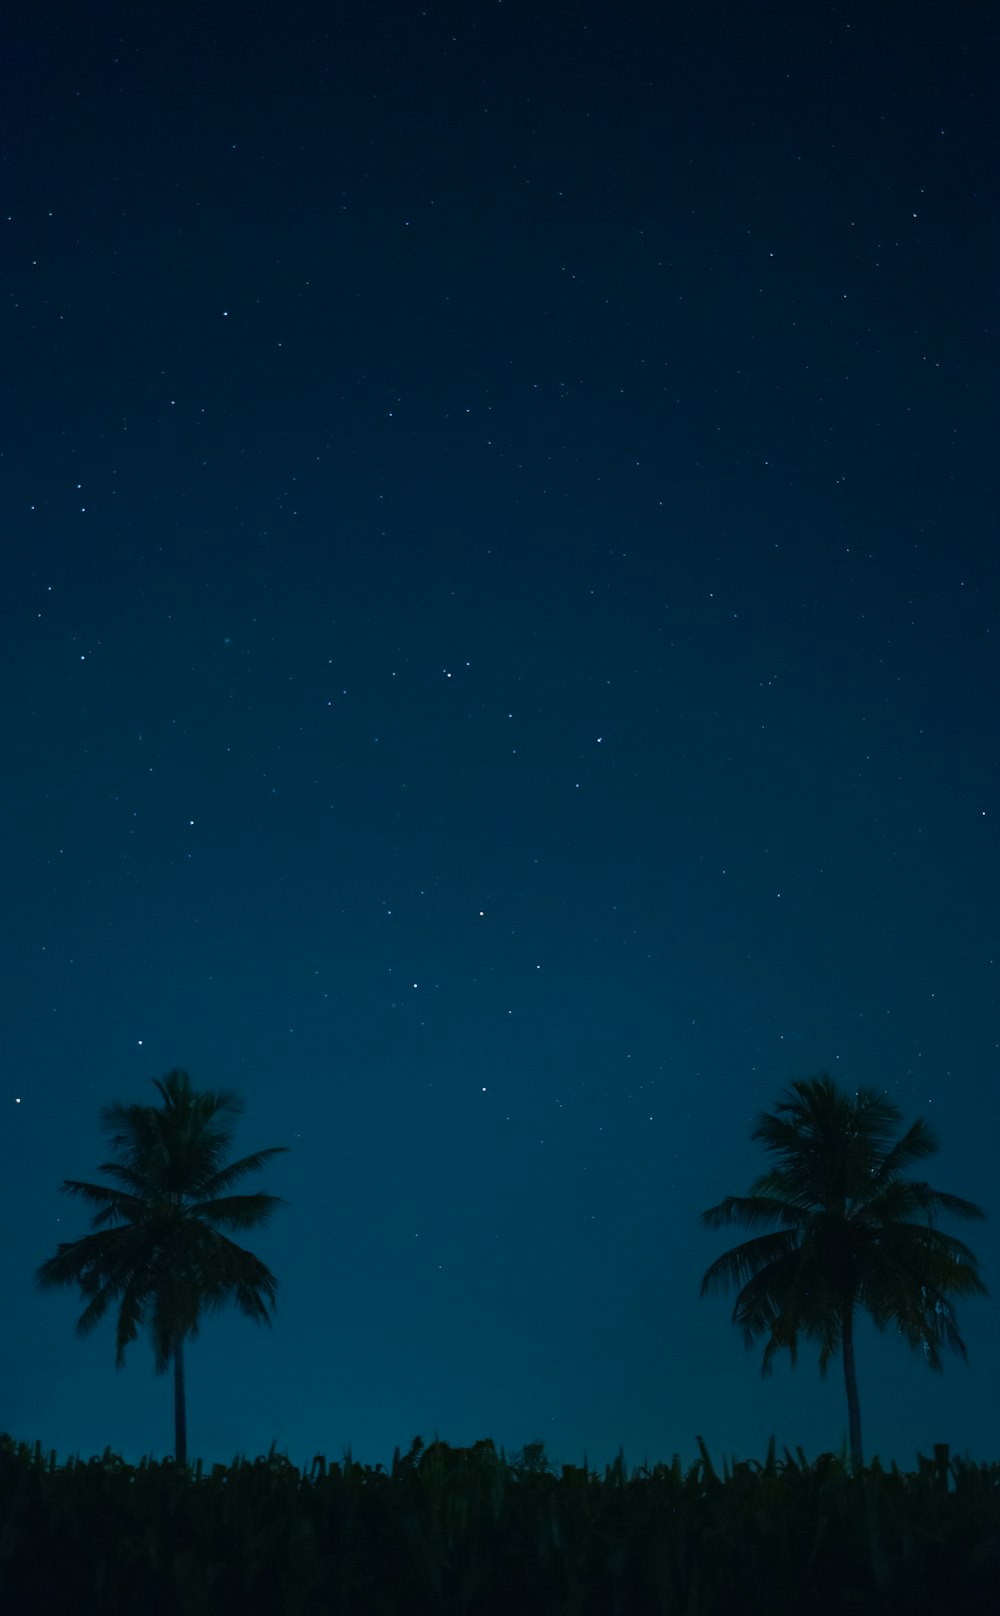 a night sky with palm trees